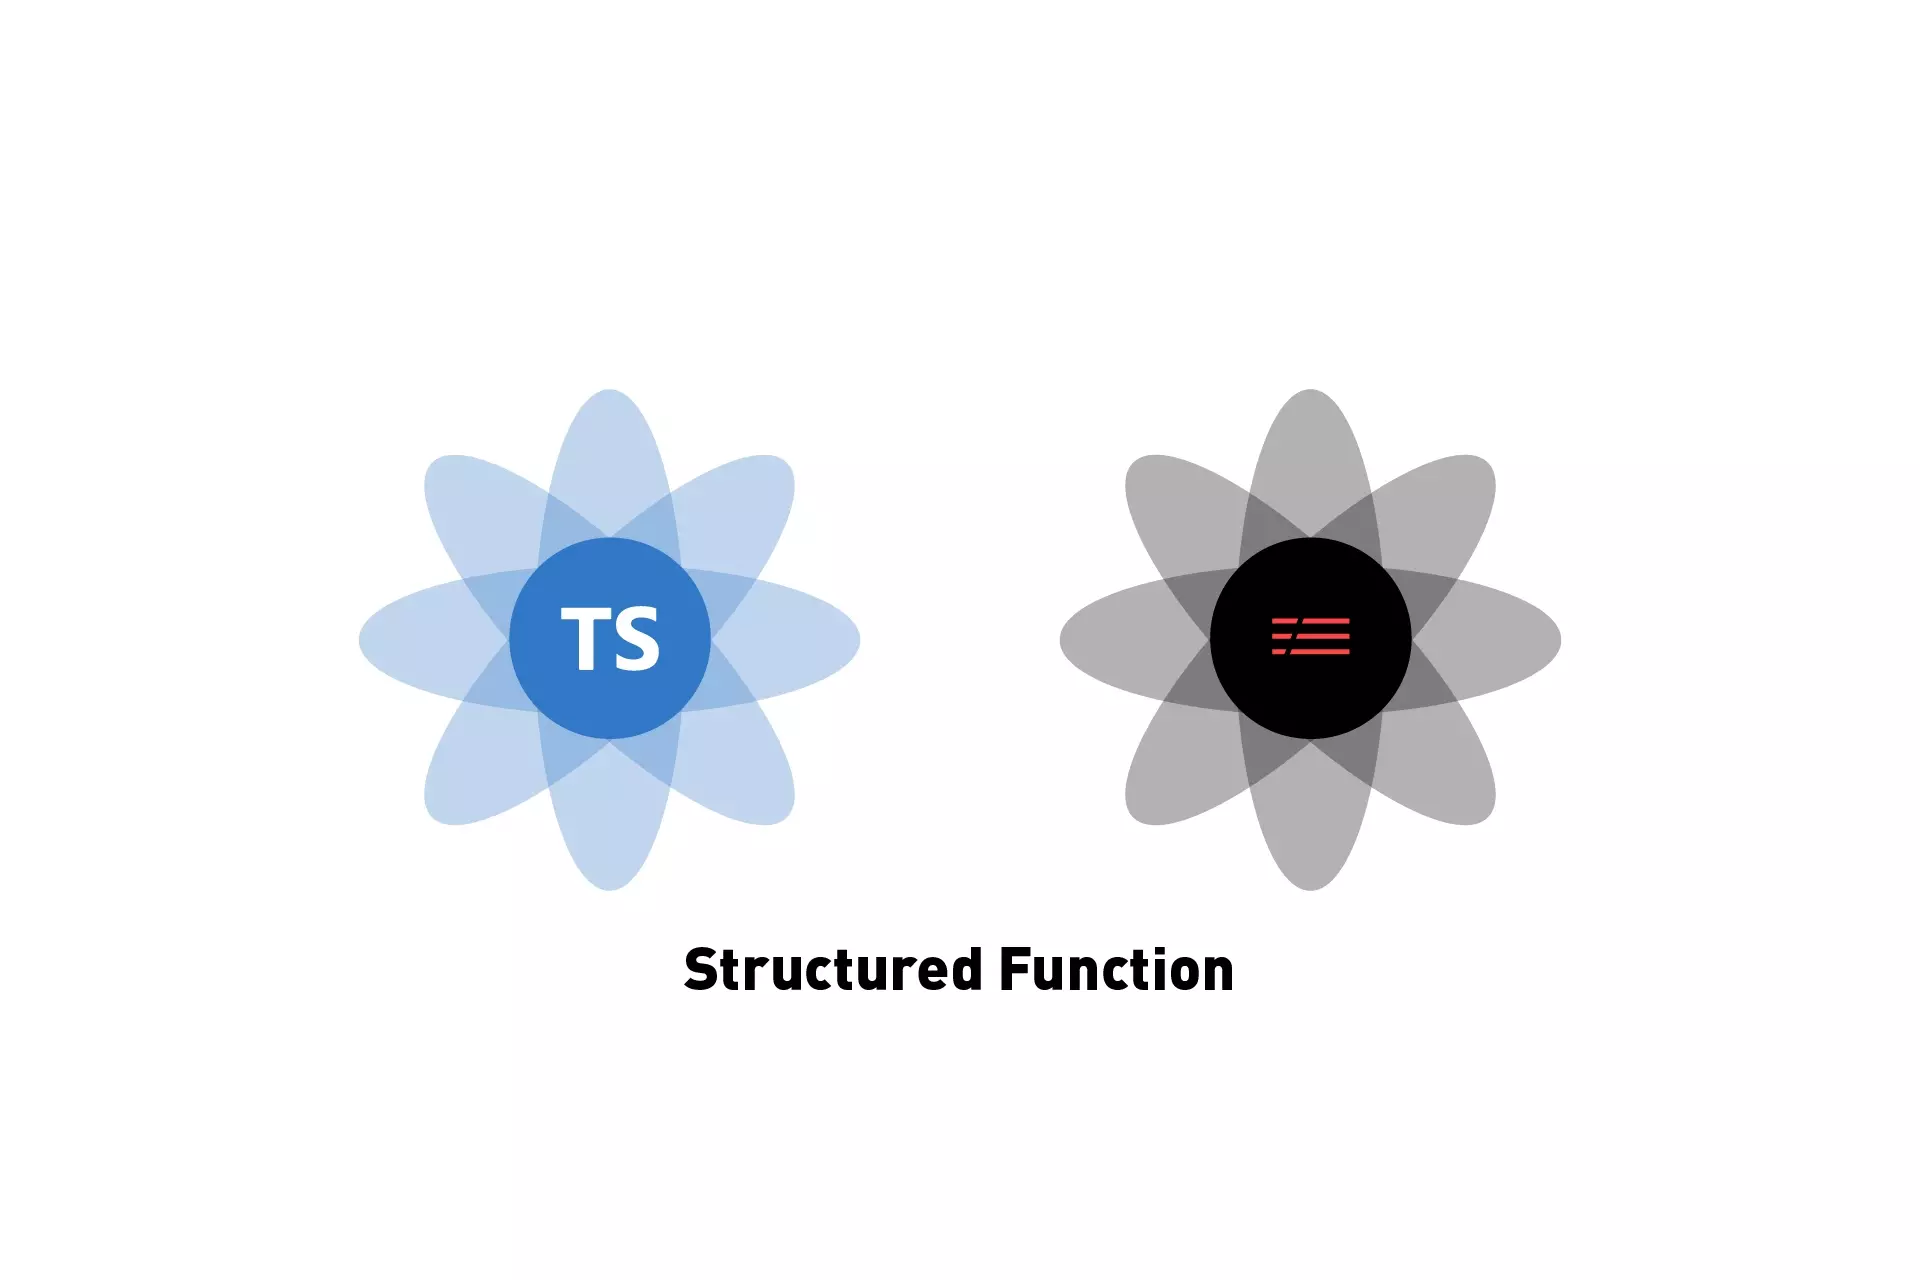 Two flowers that represent Serverless & Typescript side by side. Beneath it sits the text "Structured Function".